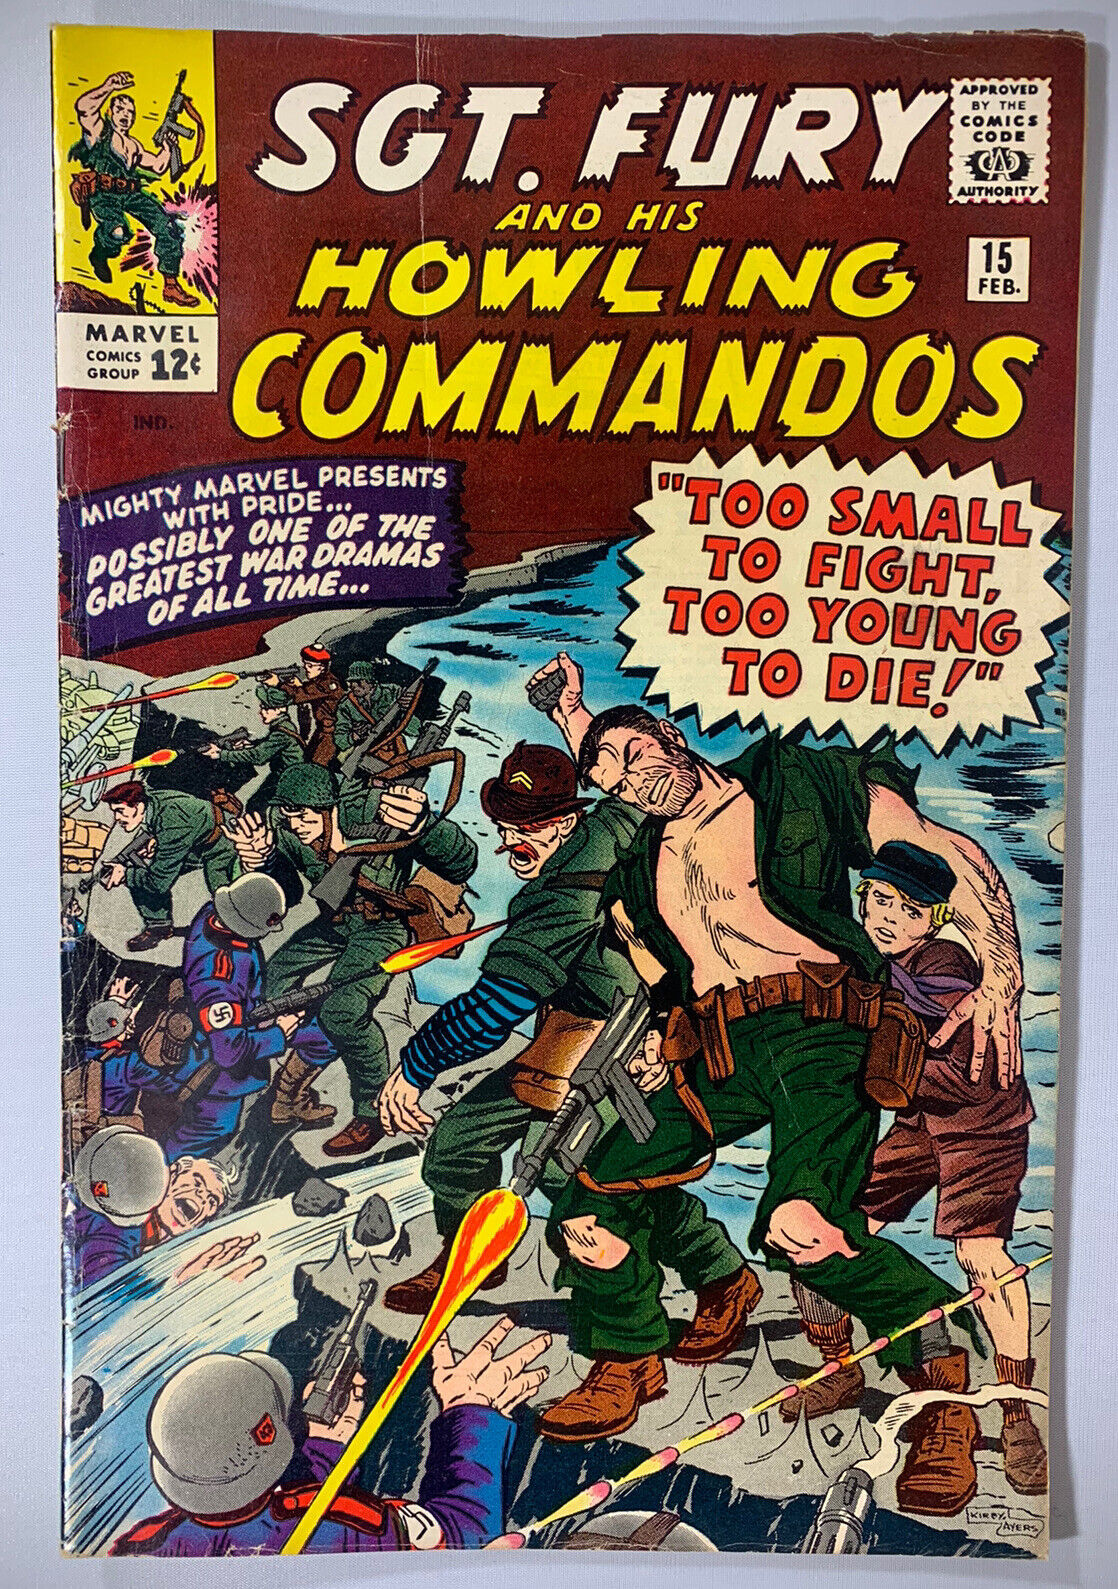 Sgt. Fury and His Howling Commandos #15 (1964) in 4.5 Very Good+